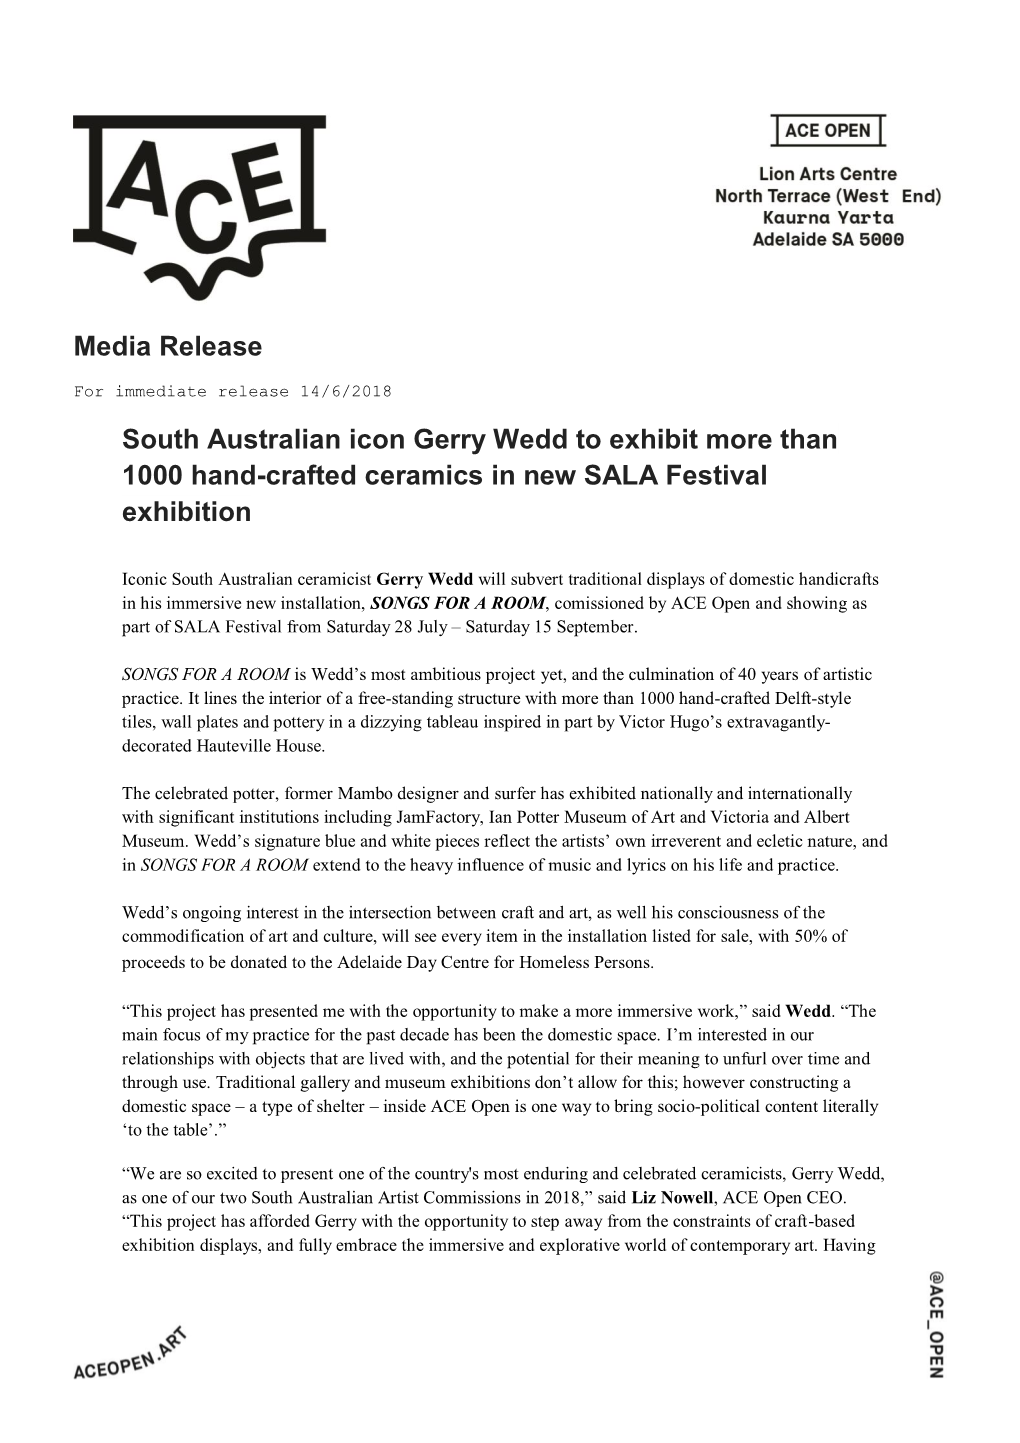 Media Release South Australian Icon Gerry Wedd to Exhibit More Than